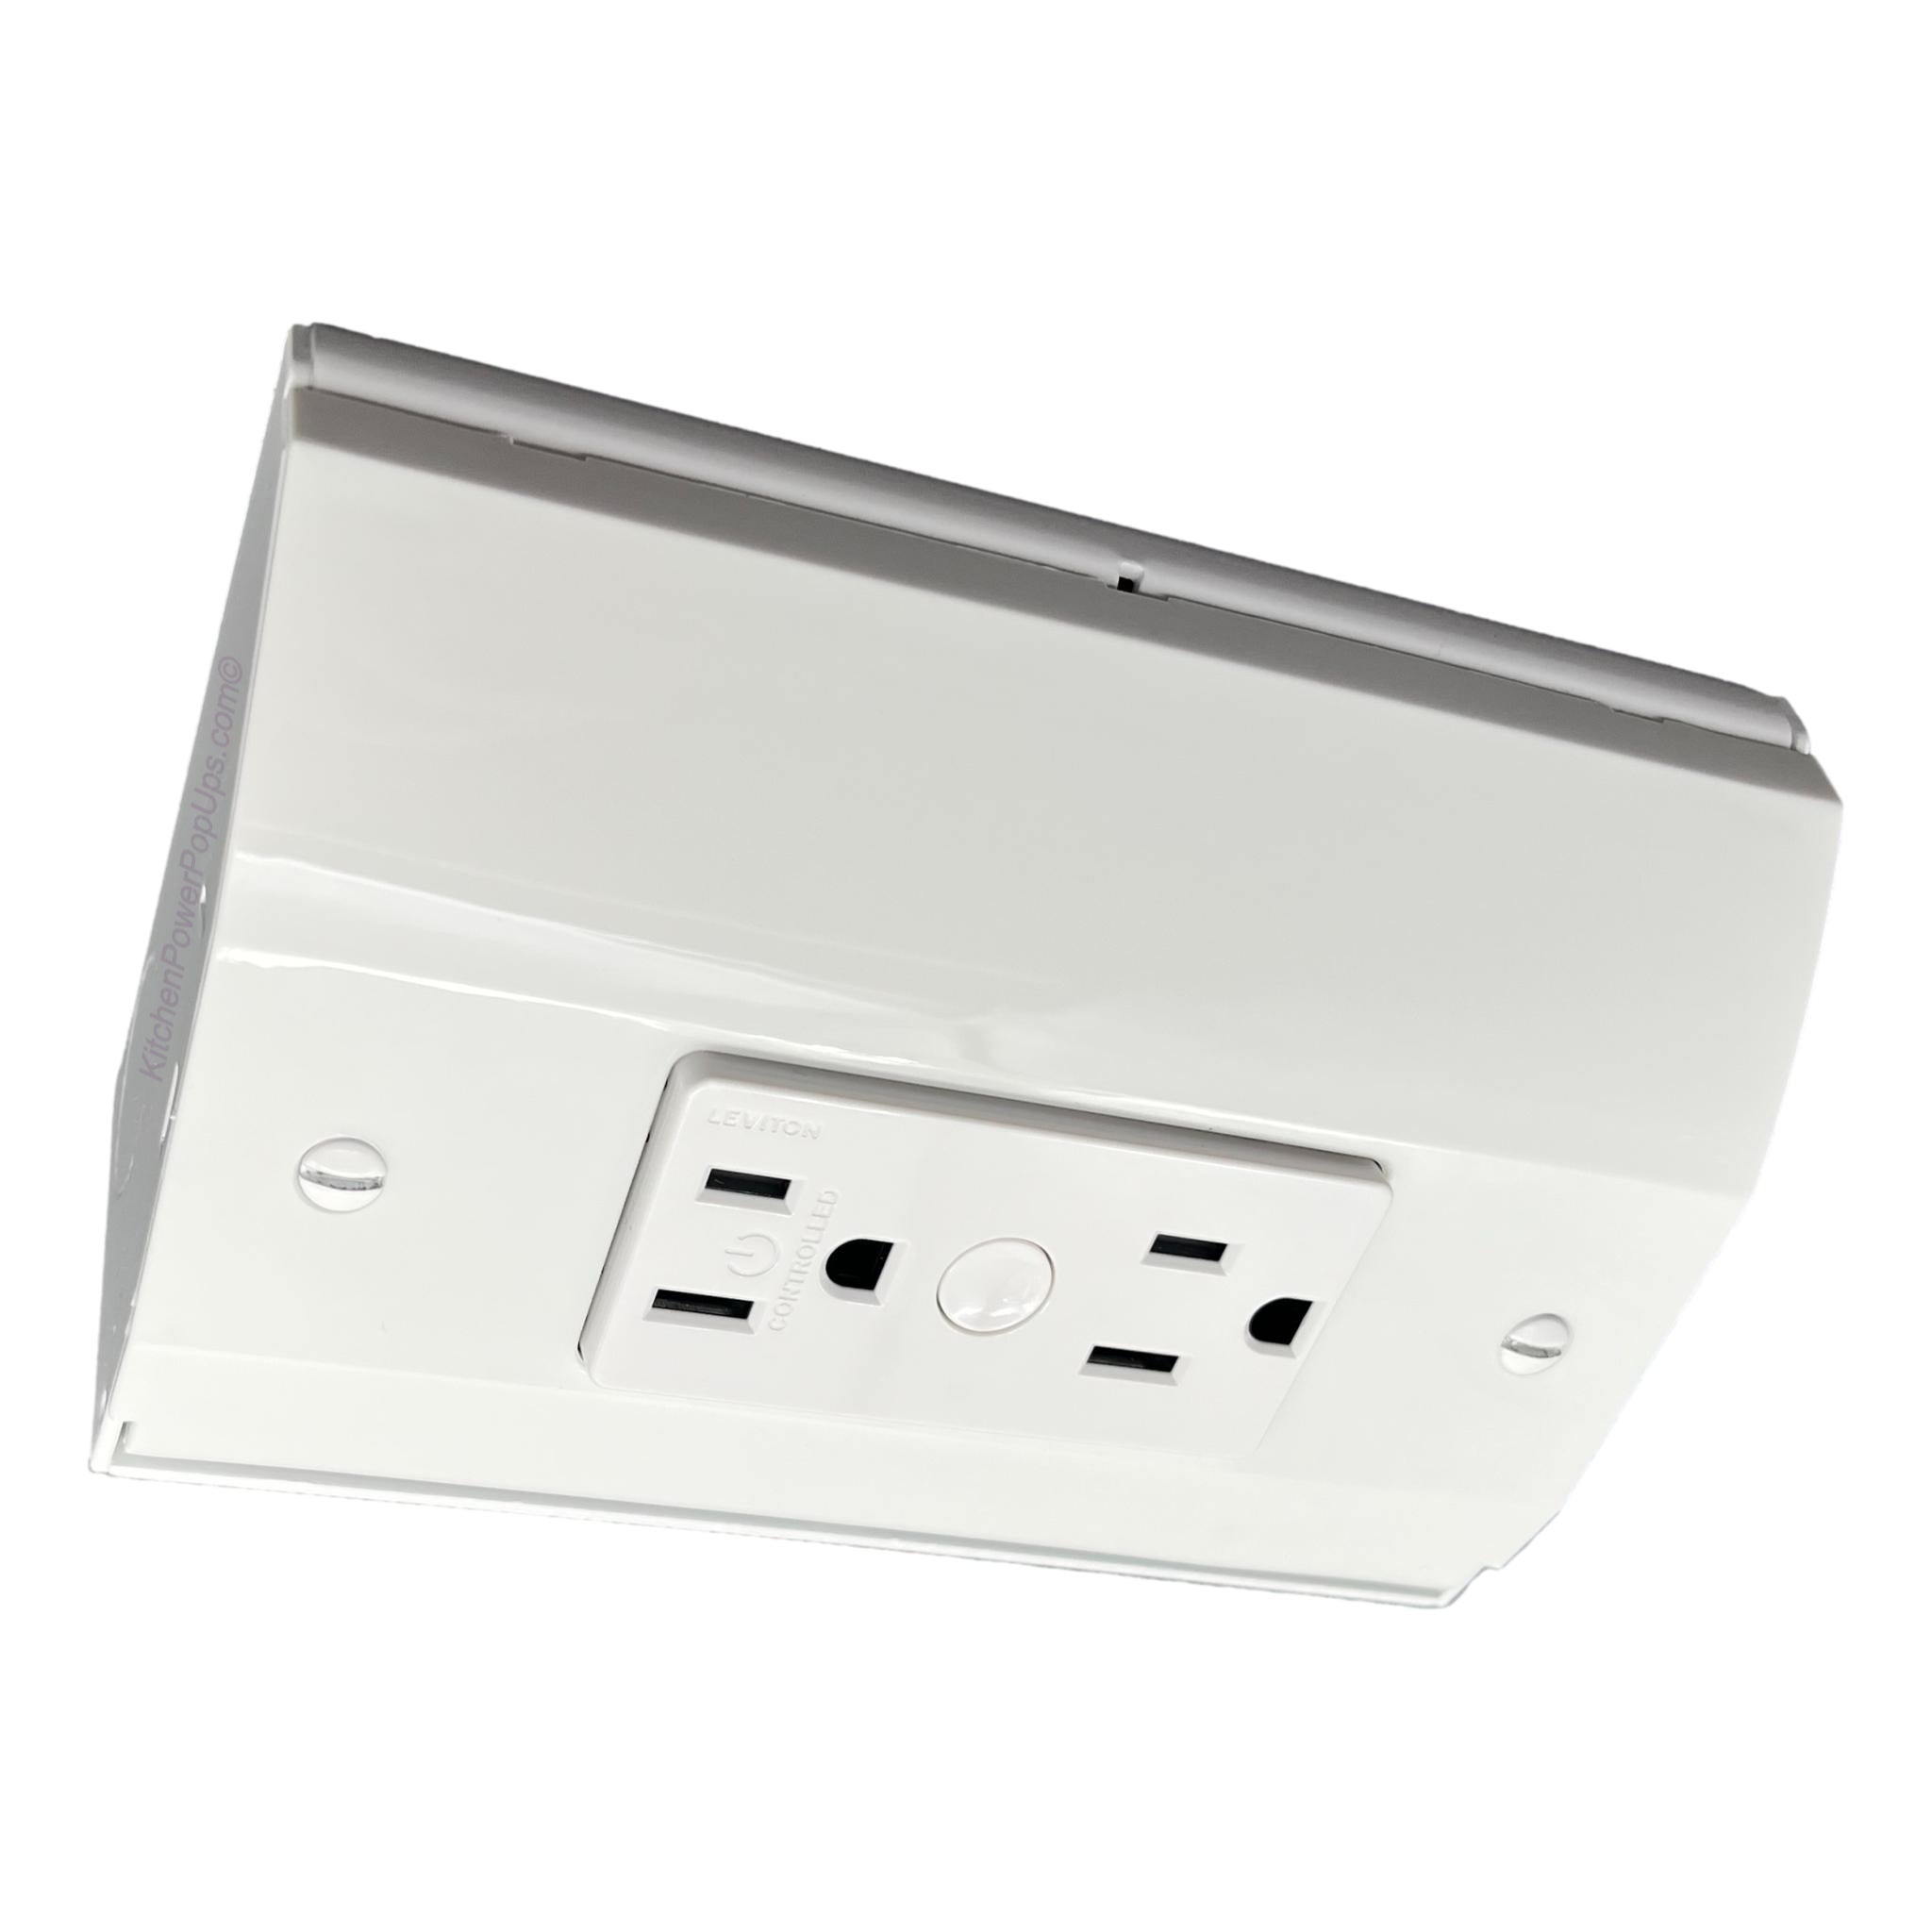 Under Cabinet Low Profile Power Outlet Box, GFCI and Switch, White